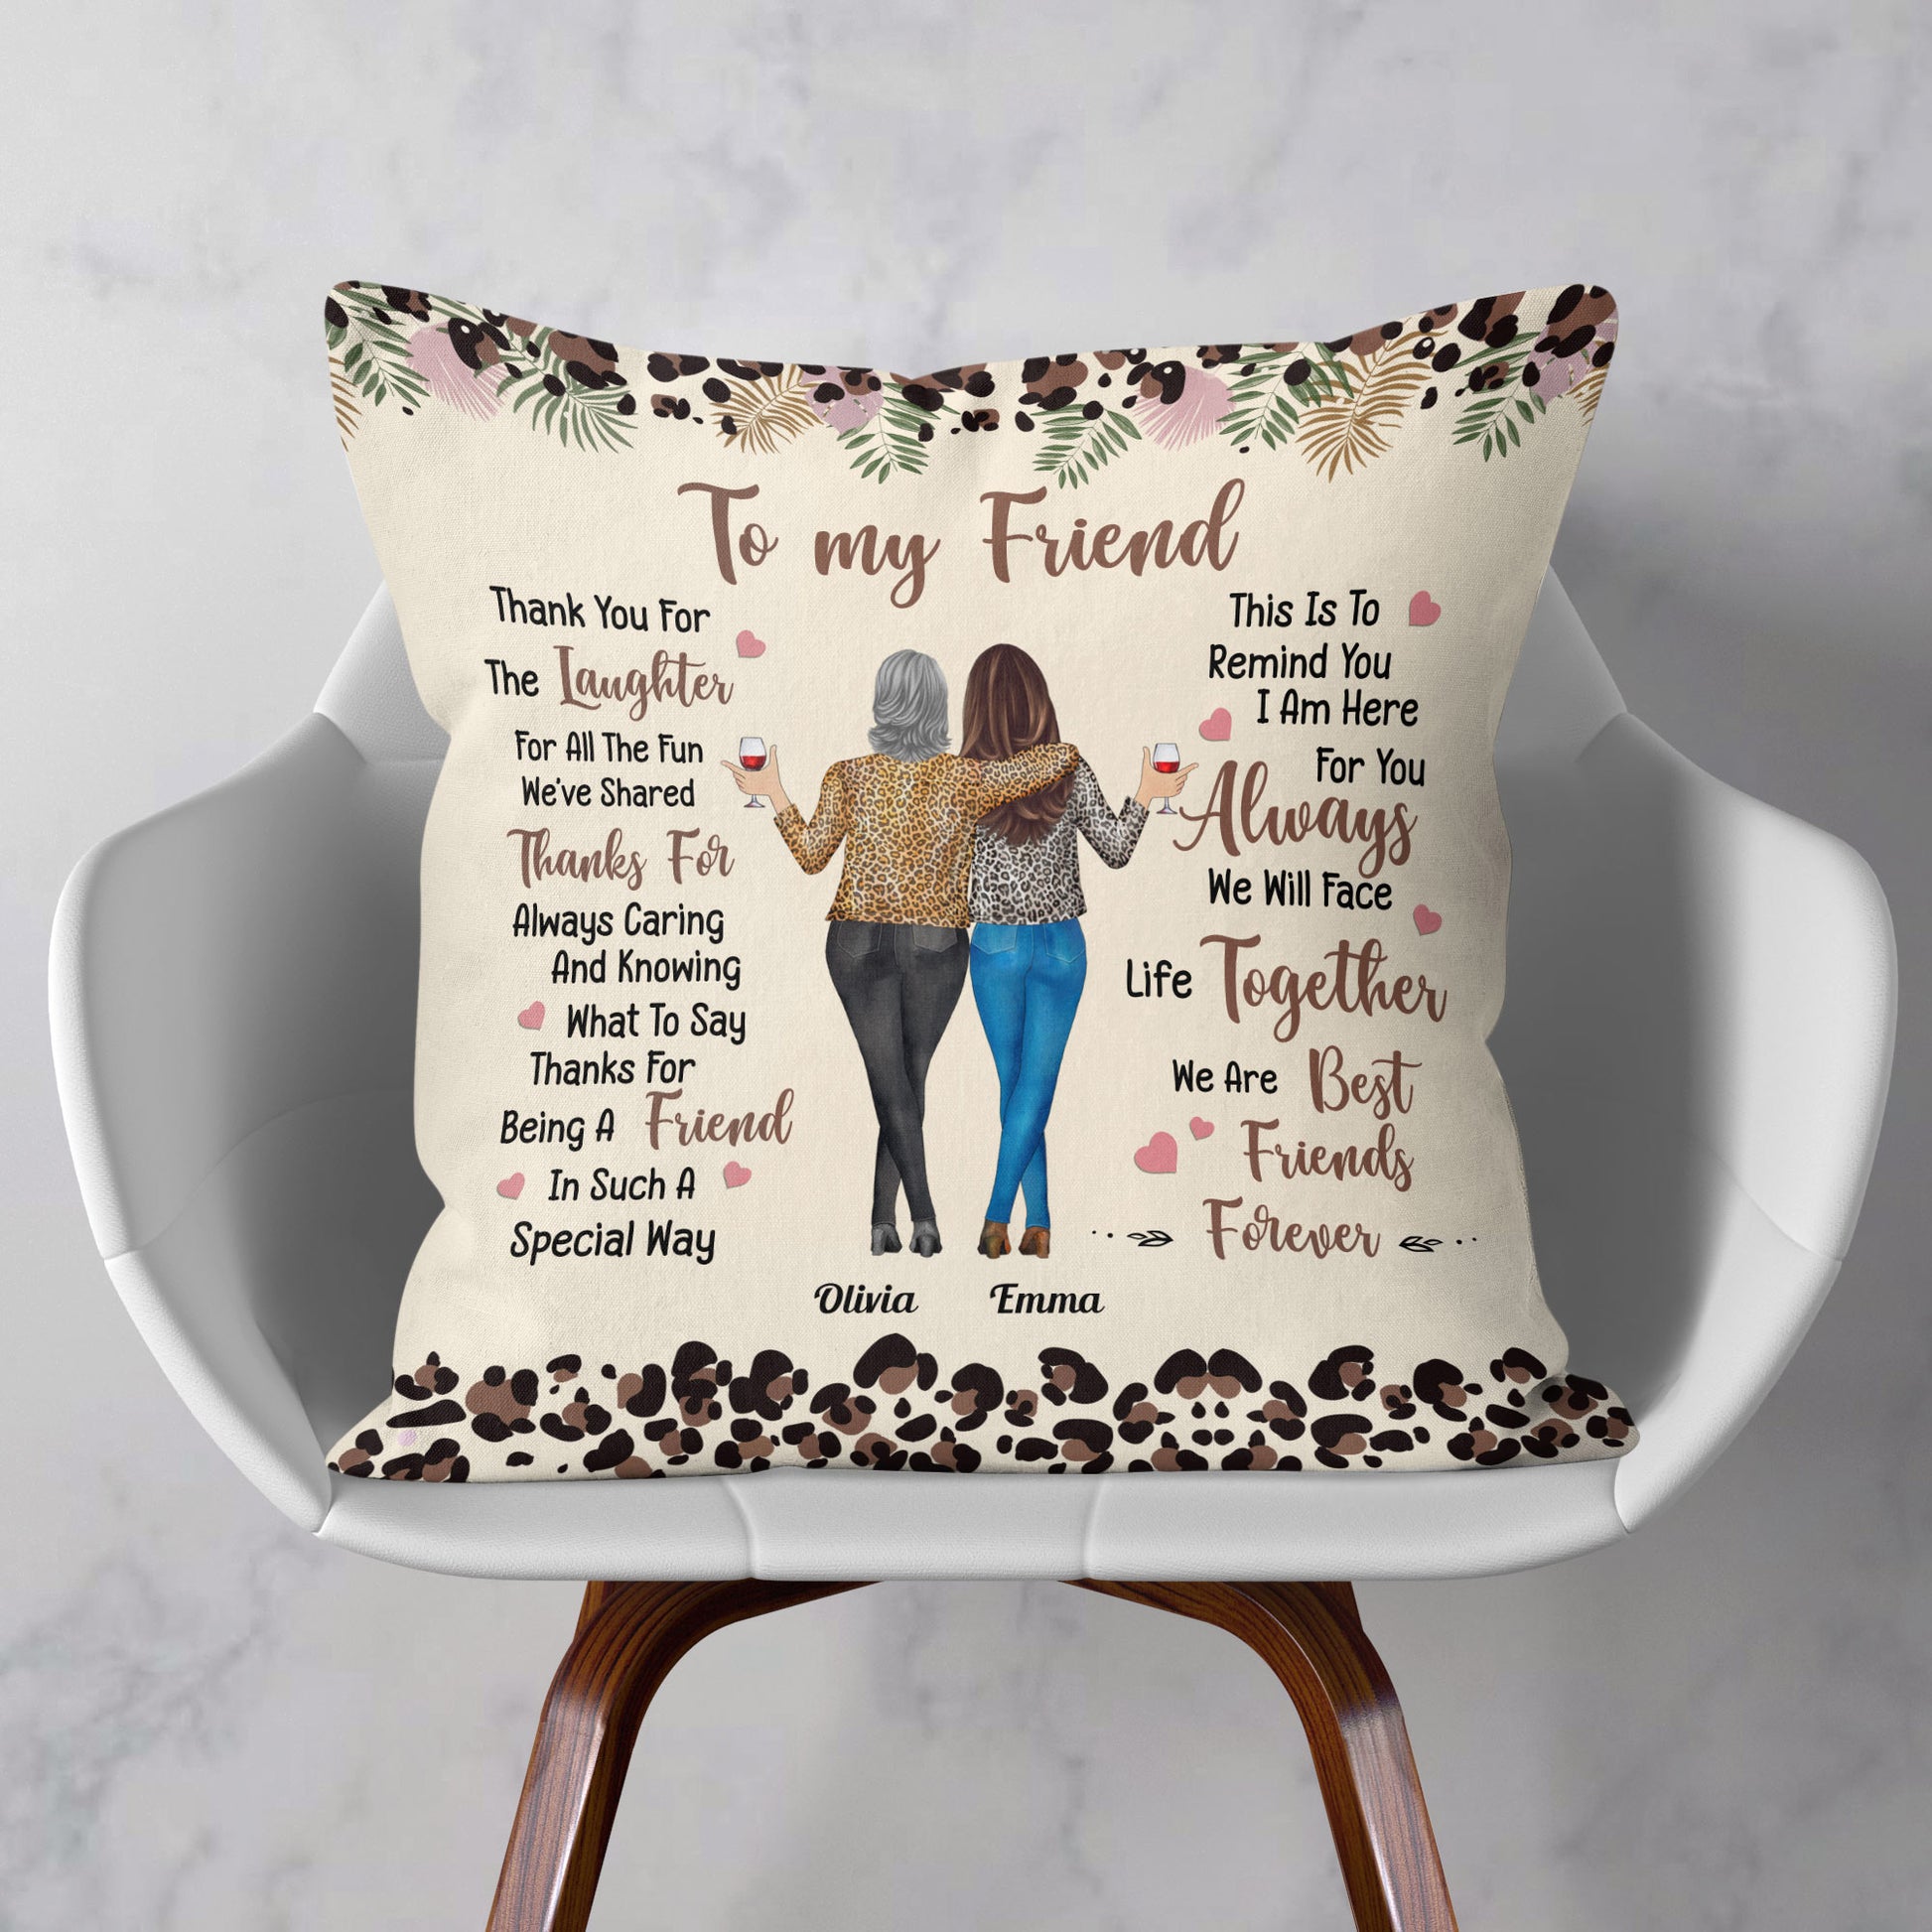 https://macorner.co/cdn/shop/files/Thank-You-For-The-Laughter-Friendship-Personalized-Pillow-_Insert-Included_1_9433750a-0b2f-42d2-a28d-3139b438c44e.jpg?v=1698900422&width=1946